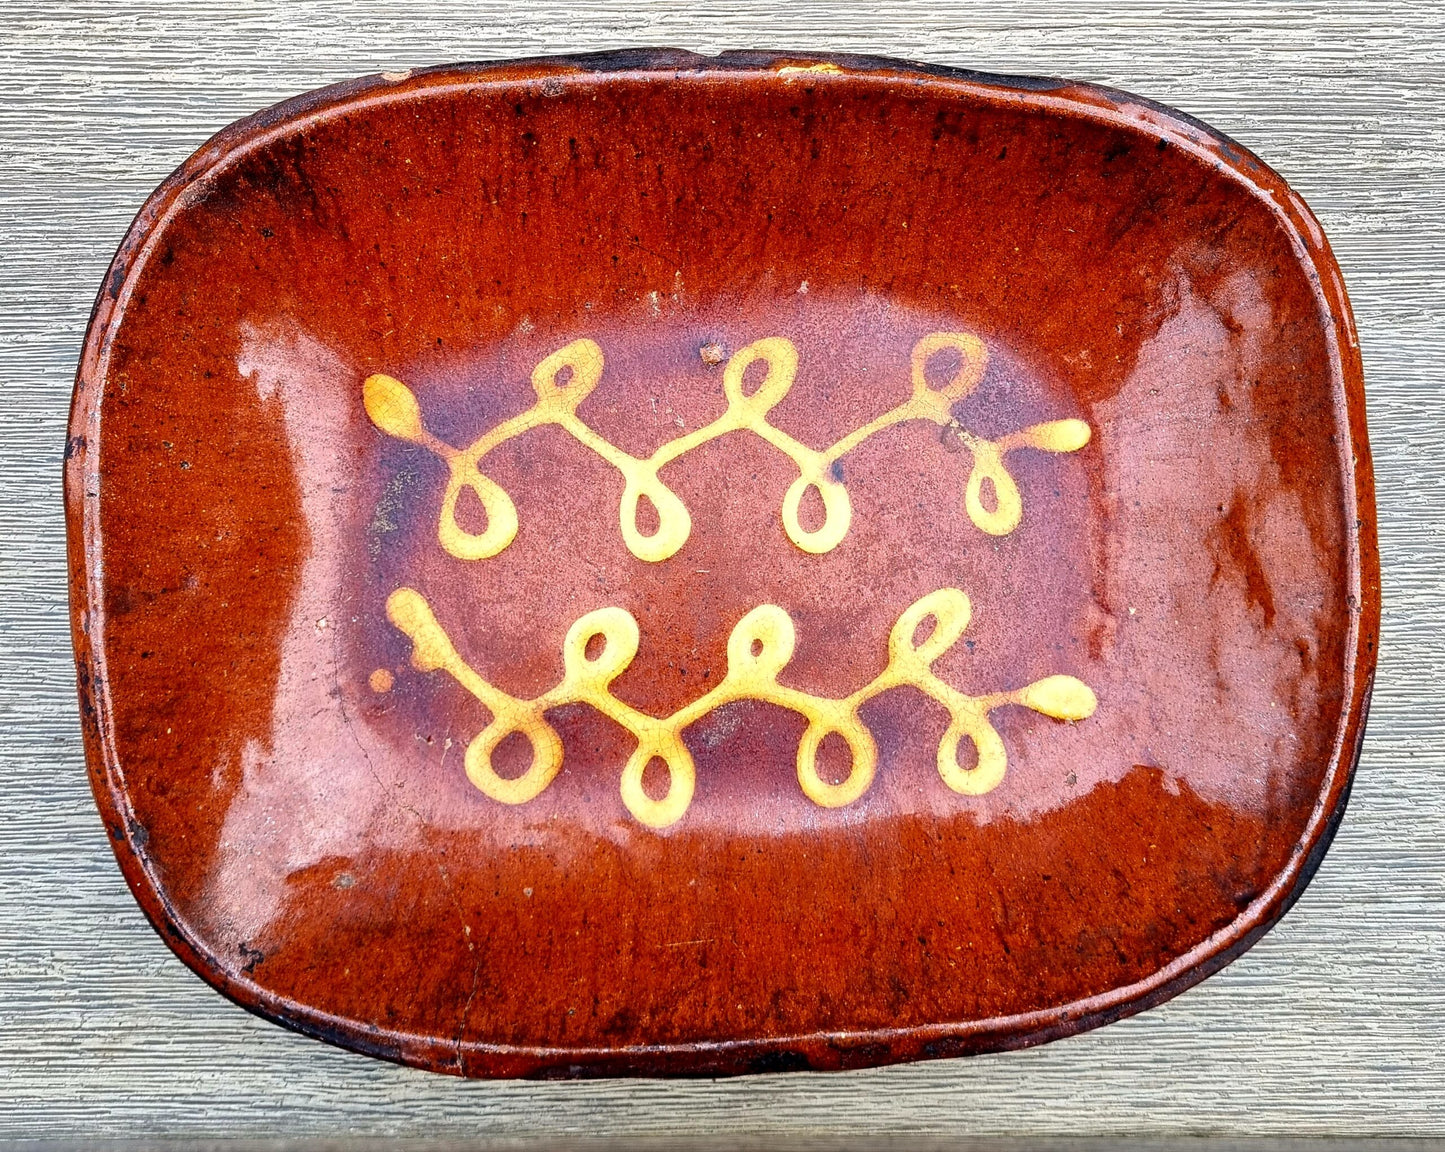 Late 18th Century Welsh Antique Earthenware Buckley Ware Slip Decorated Baking Dish